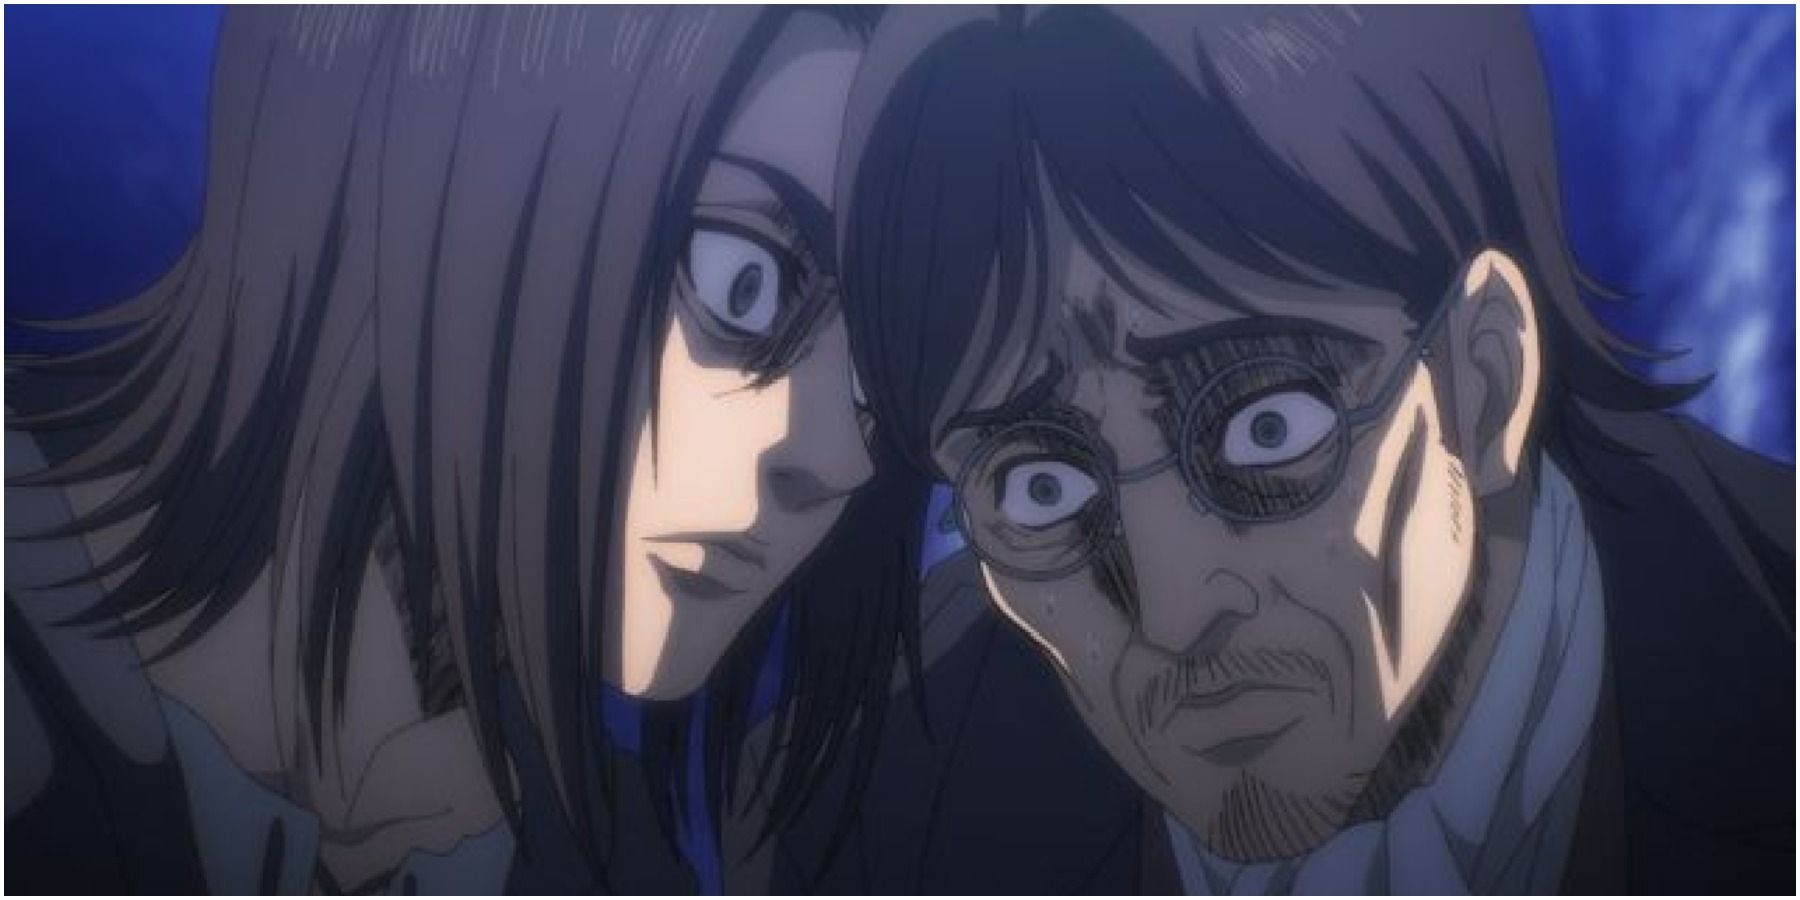 Eren pressuring his father to kill people.